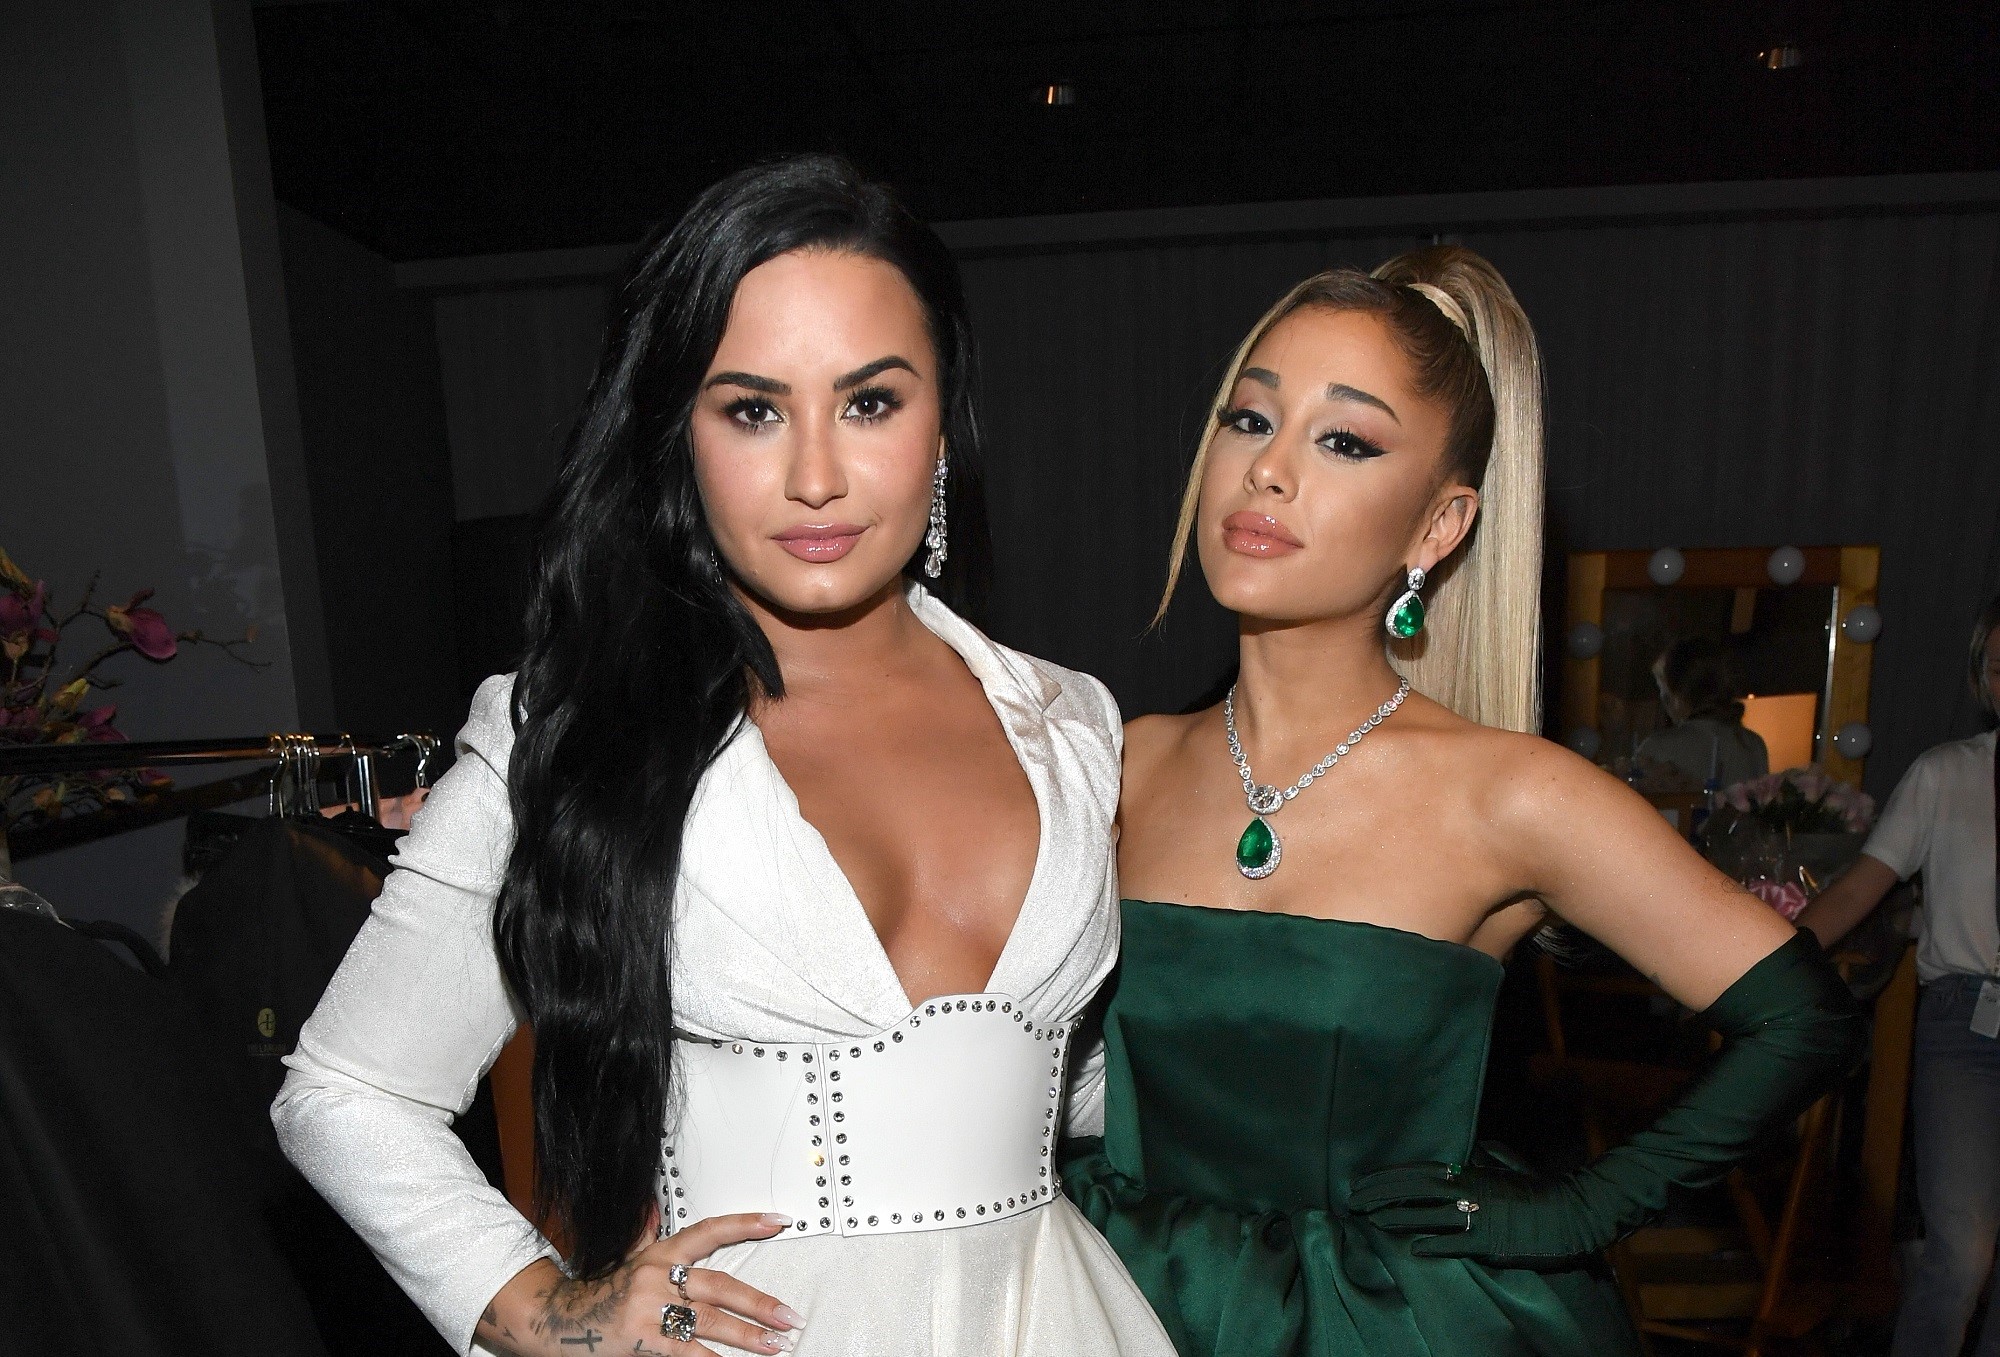 Demi Lovato and Ariana Grande pose together during the 62nd Annual GRAMMY Awards in January 2020